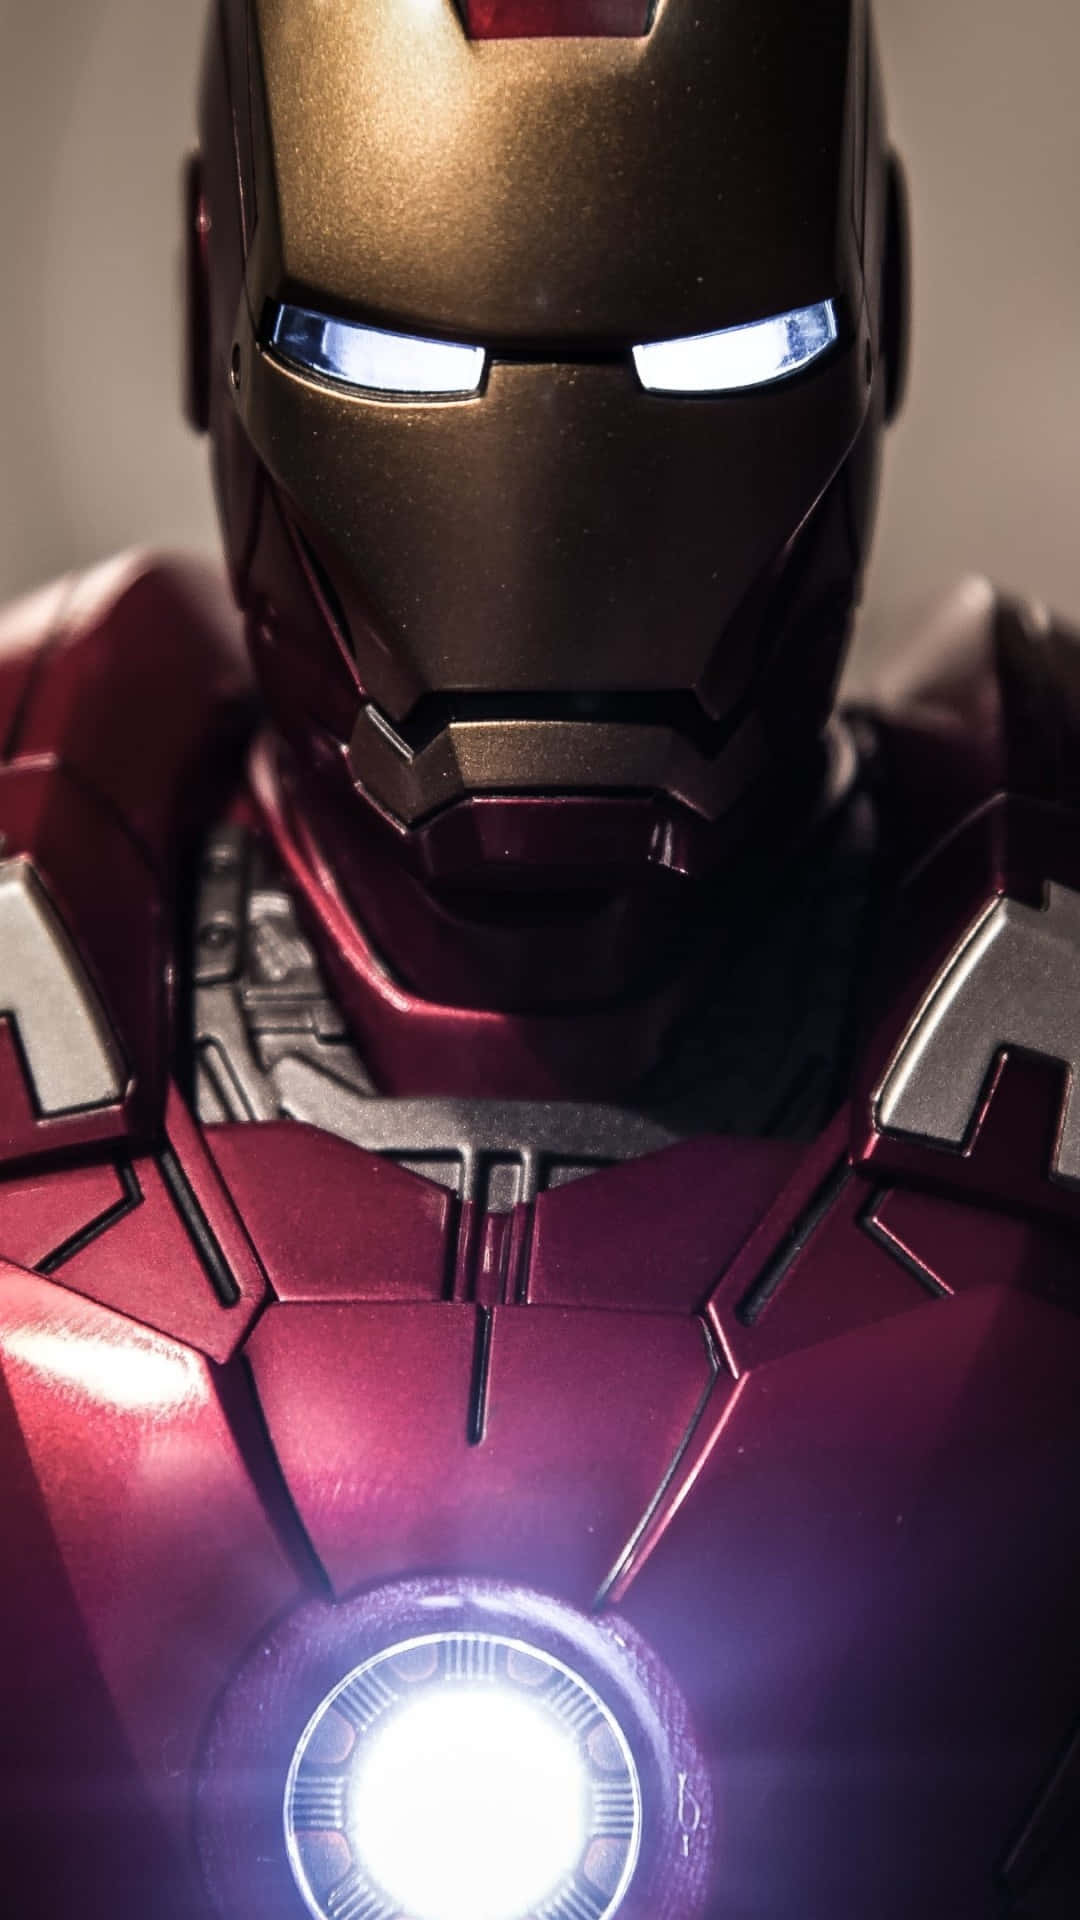 Own a phone as cool as Iron Man with the Iron Man Iphone! Wallpaper